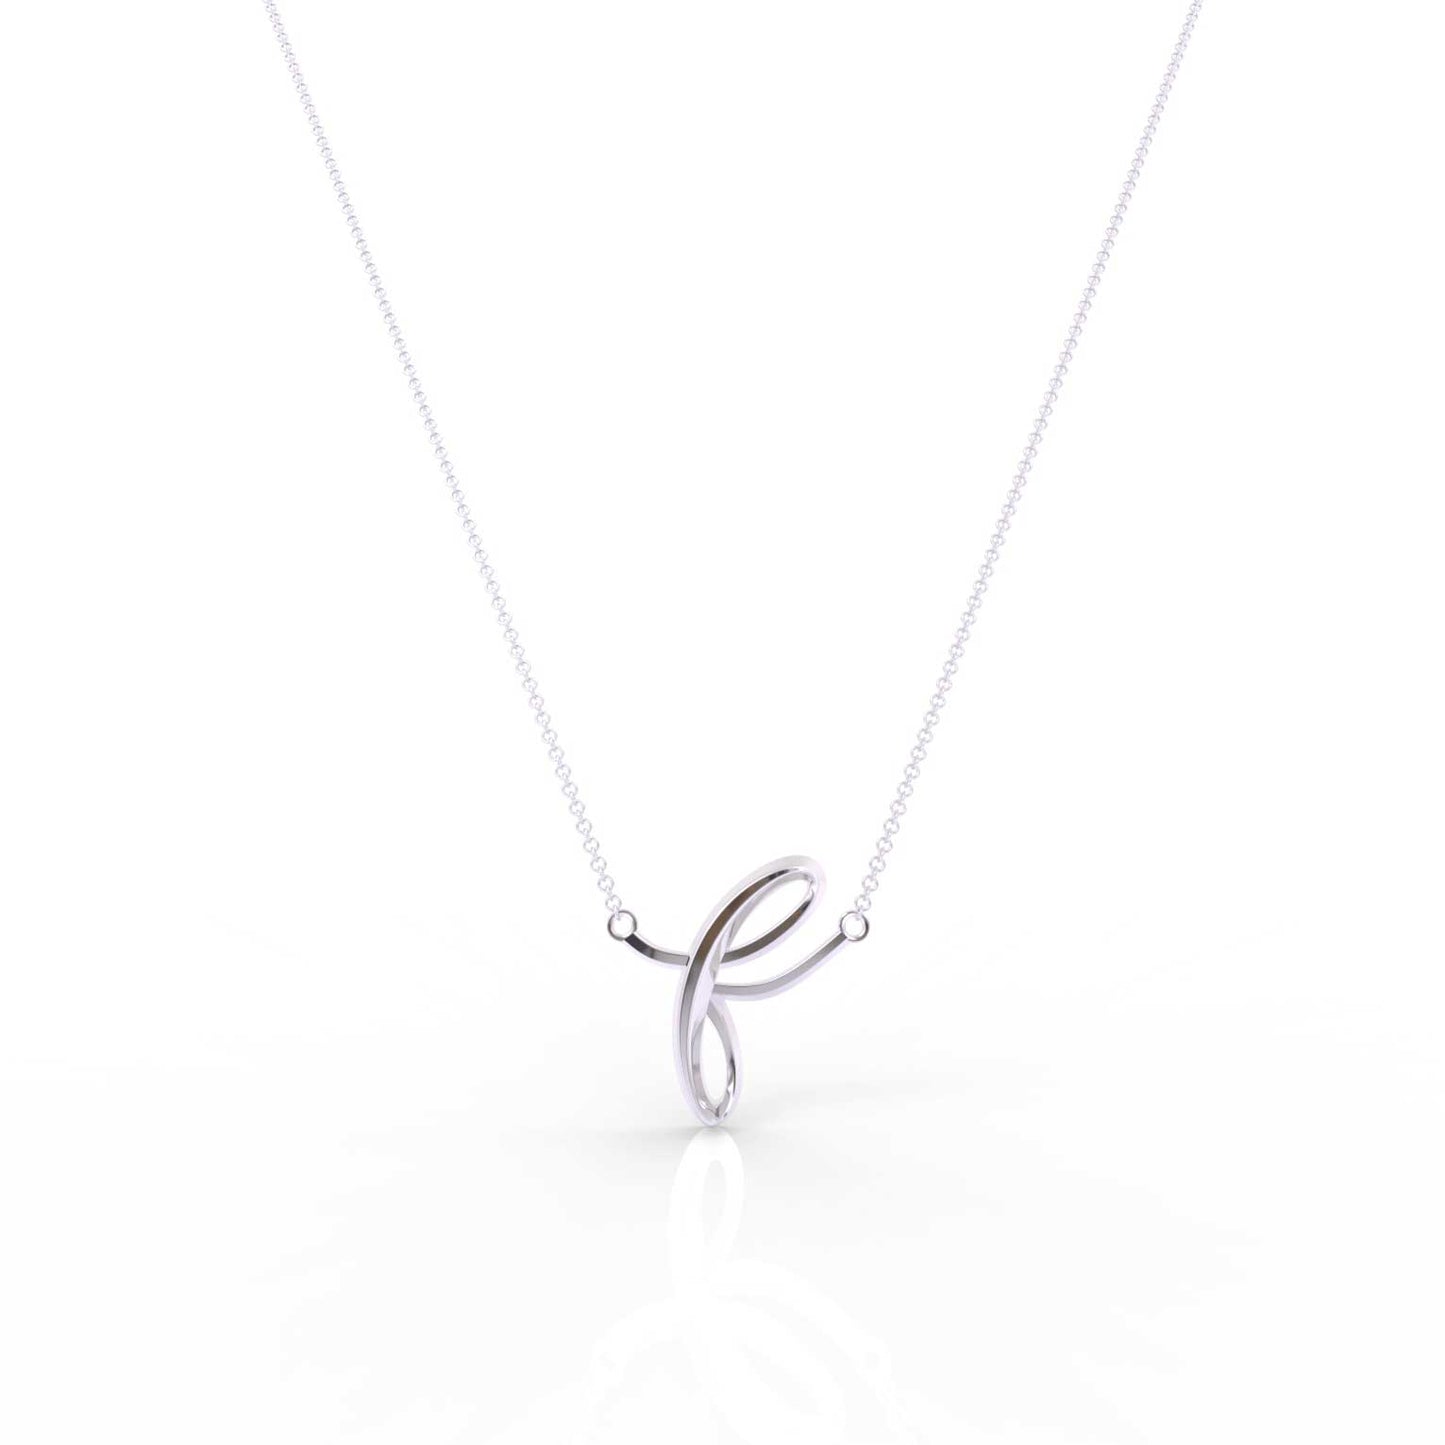 The Love Collect - "F" Necklace